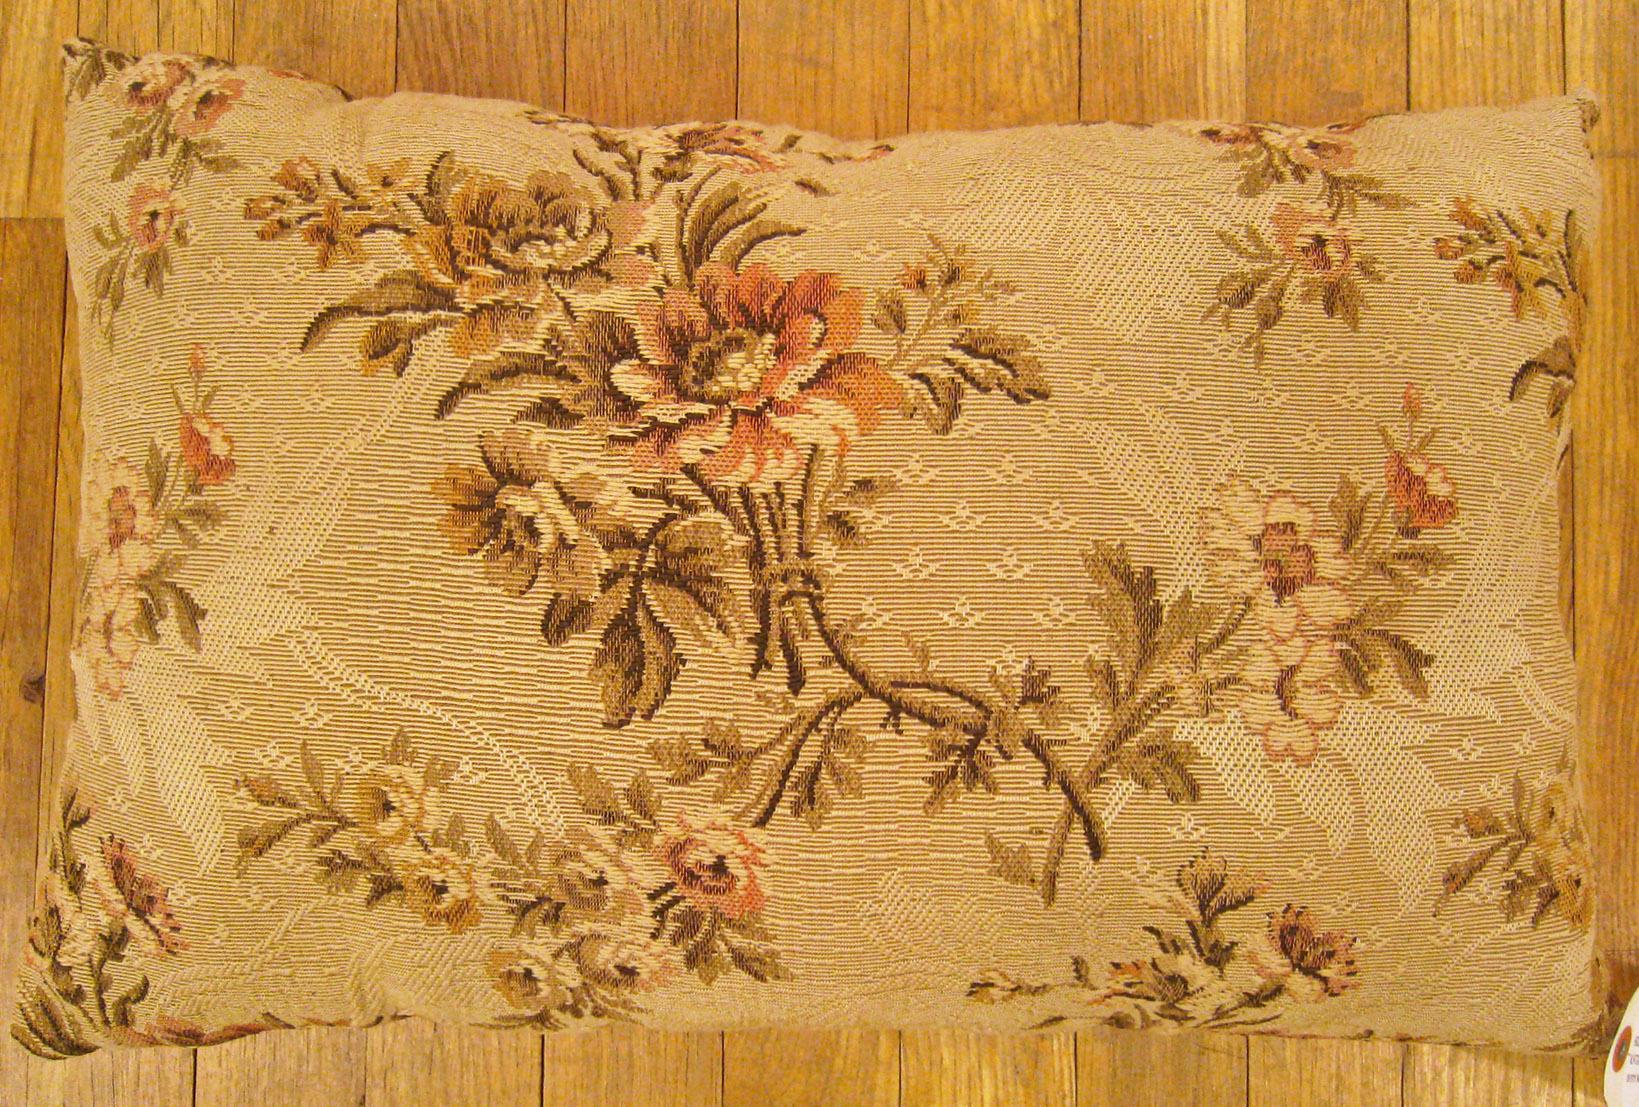 Antique Jacquard Tapestry Pillow; size 1'2” x 1'9”.

An antique decorative pillow with floral elements allover a dusty rose central field, size 1'2